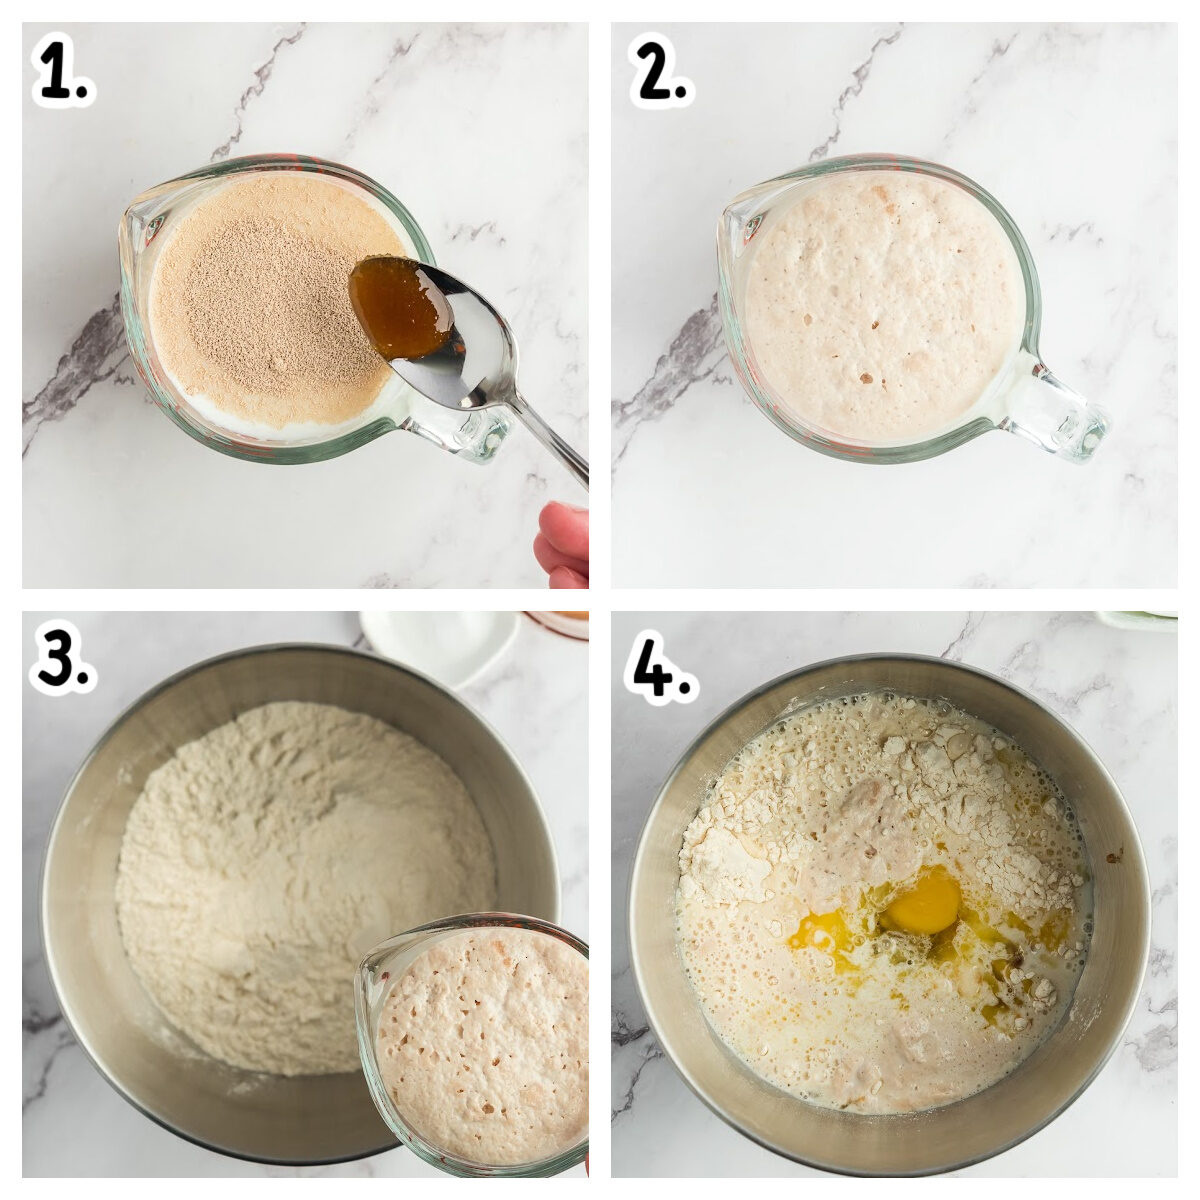 4 images showing how to start dough in bowl.